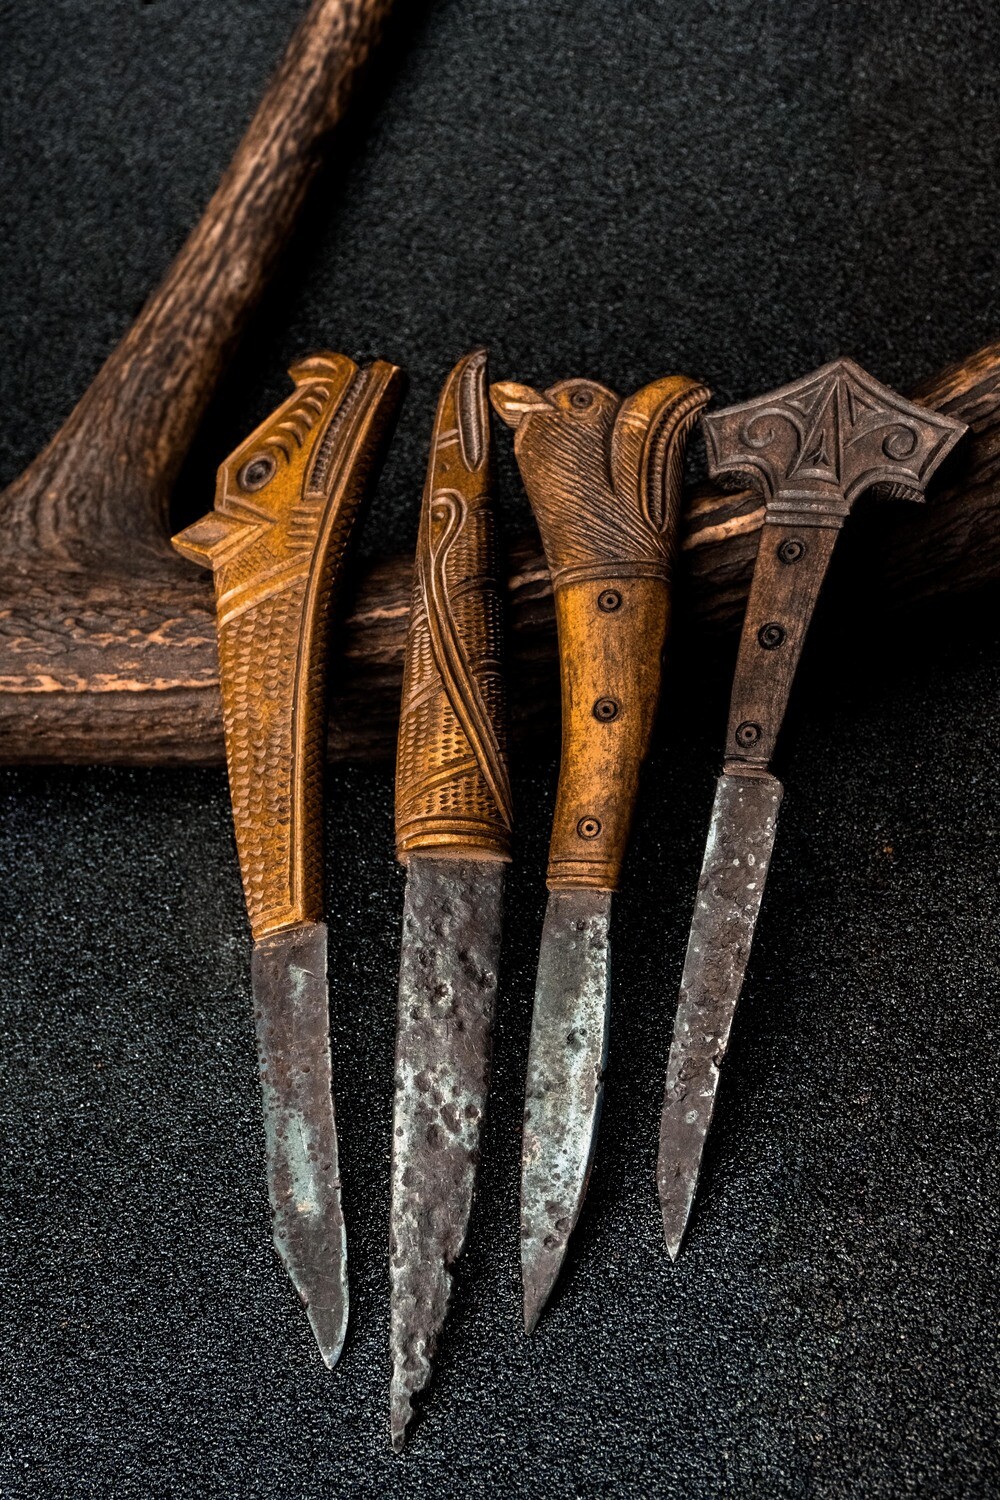 Viking Motifs Knife offer, antler and antique forged blades, Historical Style recreation